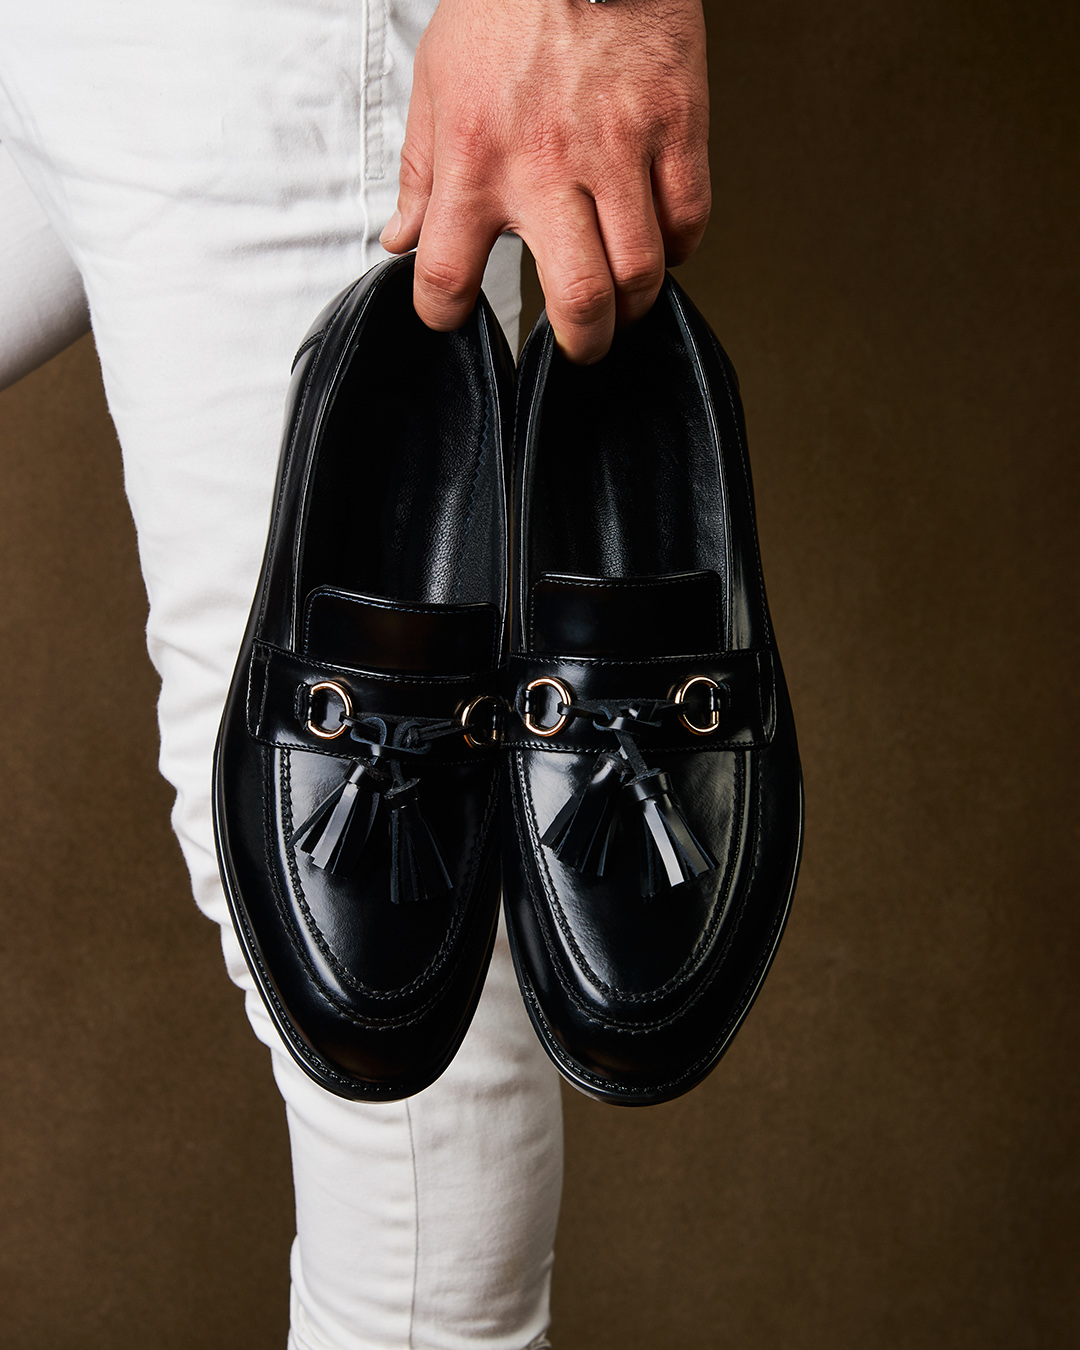 mens wedding shoes black loafers for beach wedding shutterstock